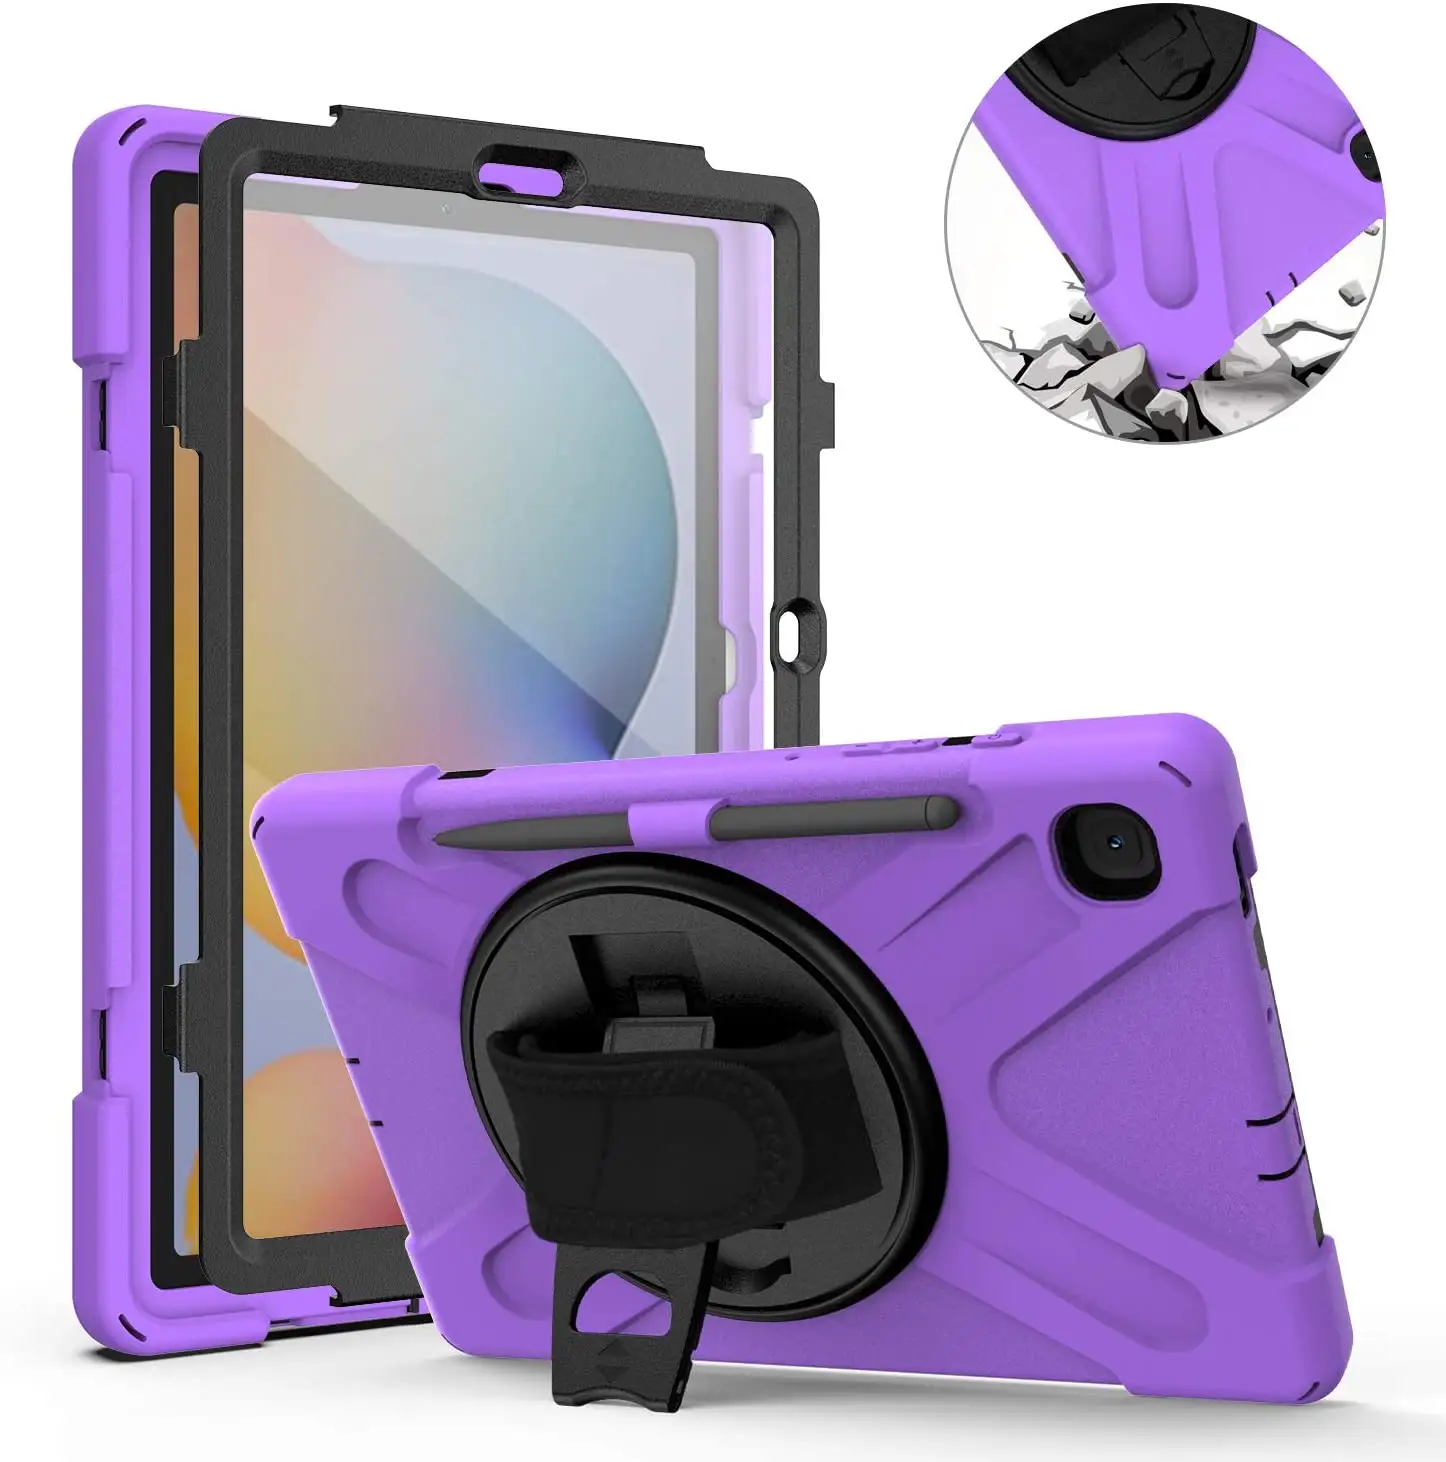 Shockproof Rugged Case For Samsung Galaxy Tab S6 Lite With Stylus Holder 10.4" 2020 P610/615 Cover With Neck Strap